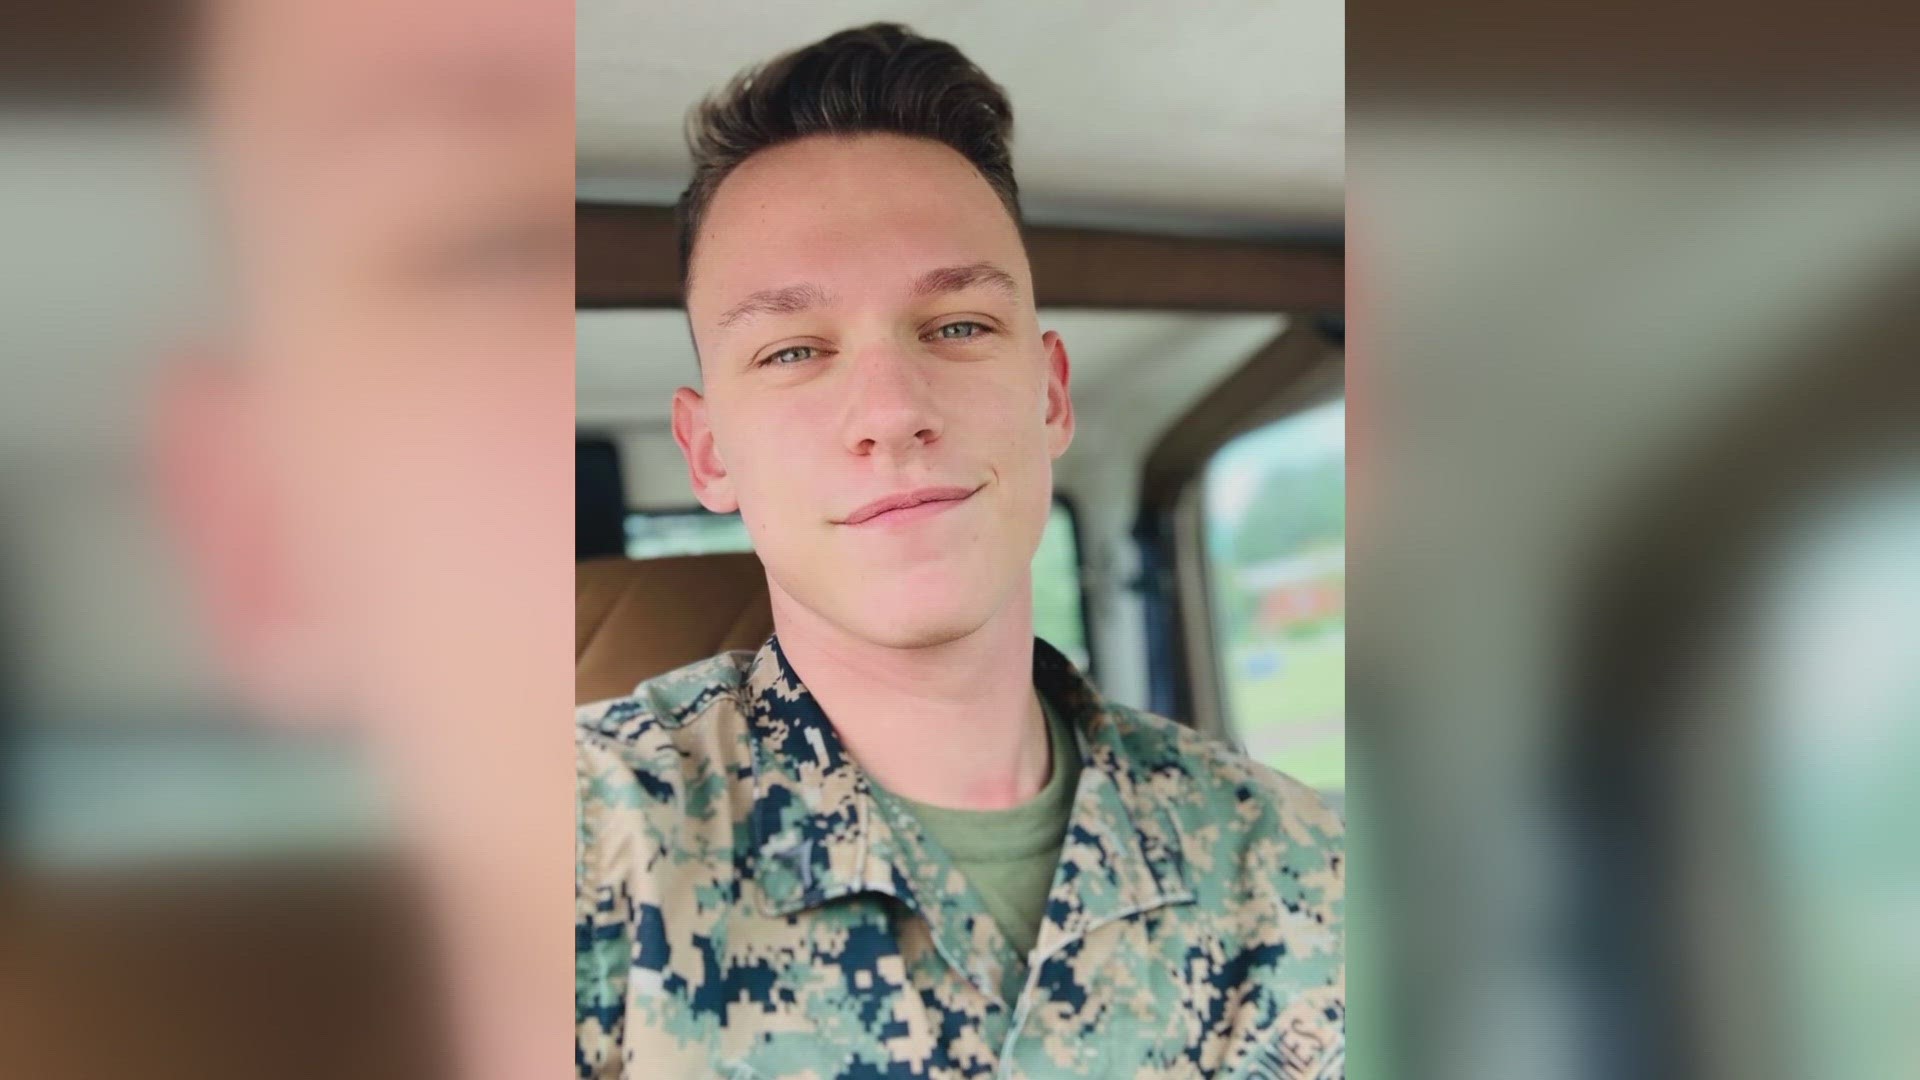 Sgt. Alec Langen, 23, of Chandler was identified by his family as one of the men killed.